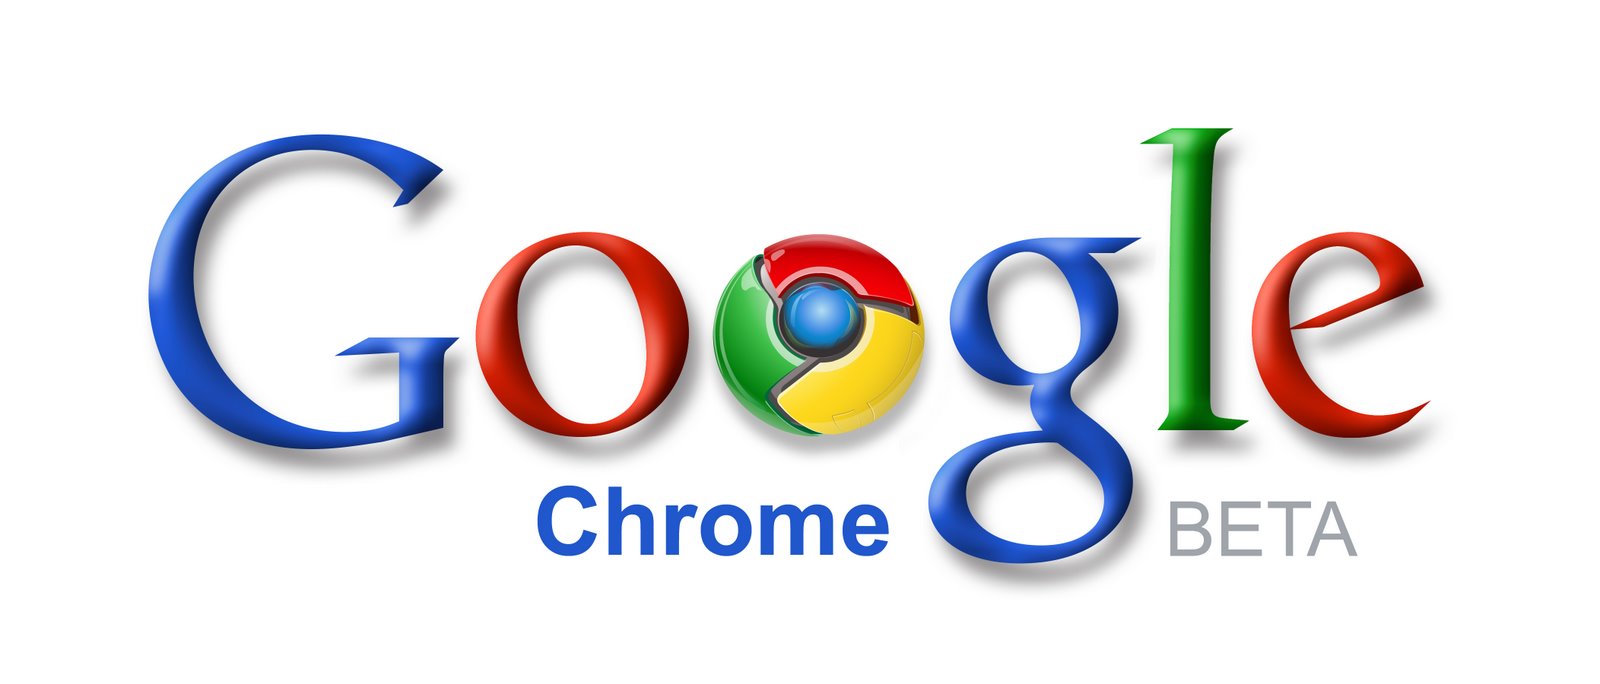 Google Chrome Implements "Do Not Track" Feature